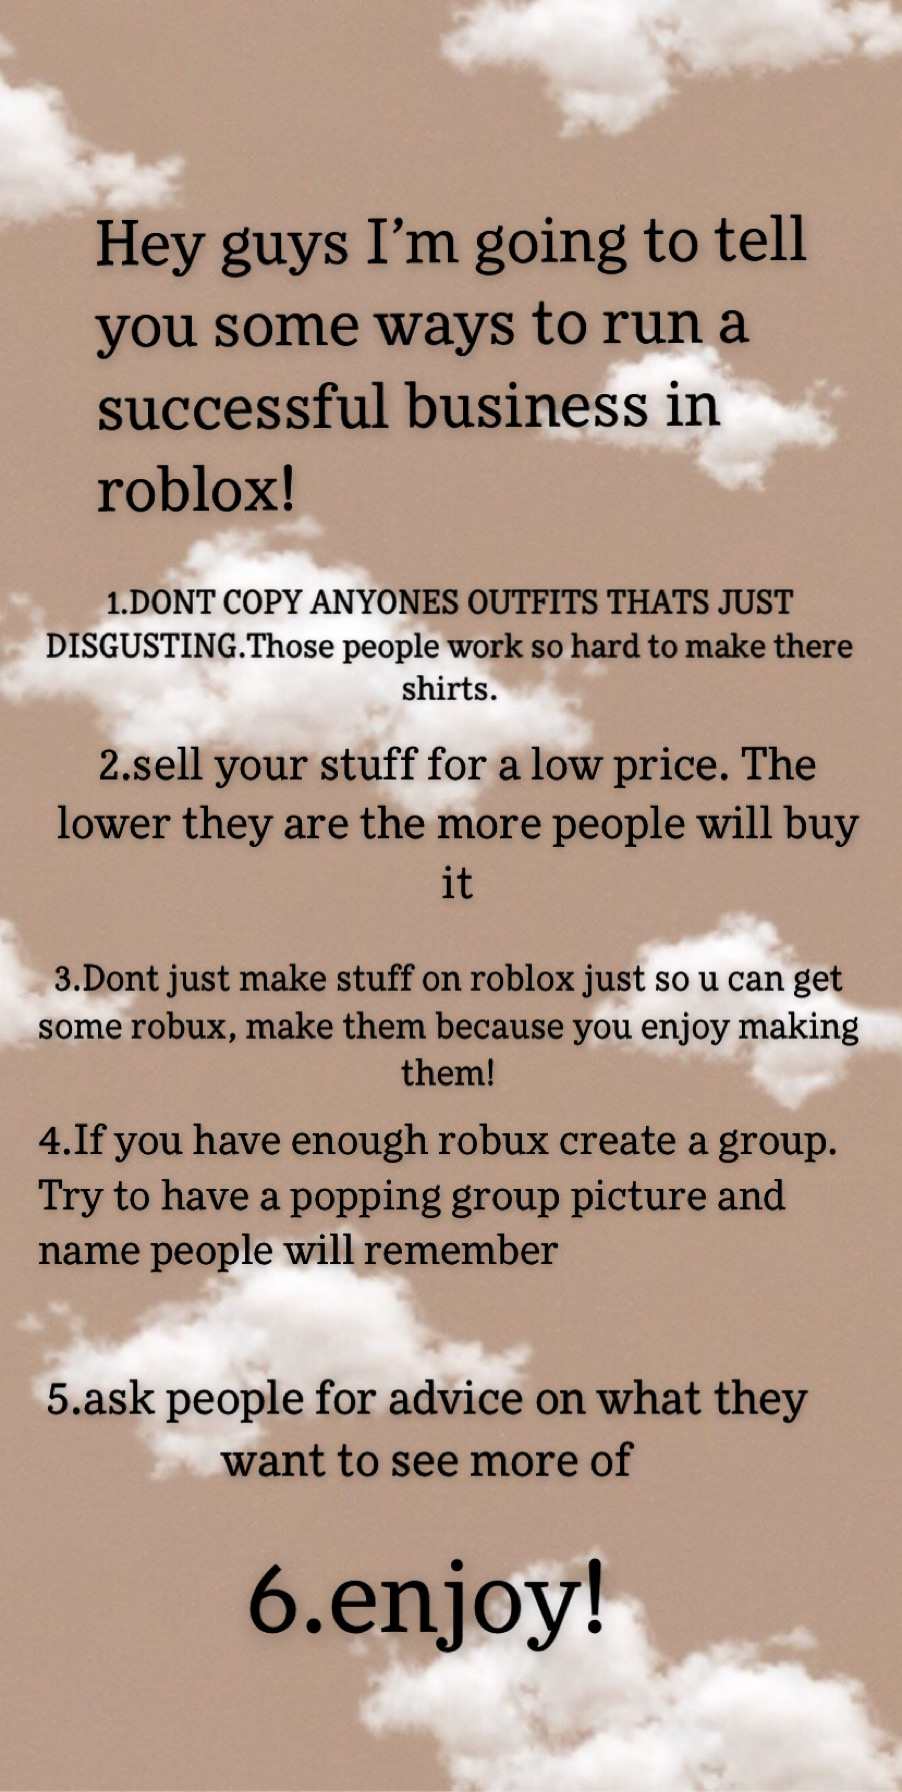 Roblox Giveaway Image By Roblox - robloxgiveaway work robux